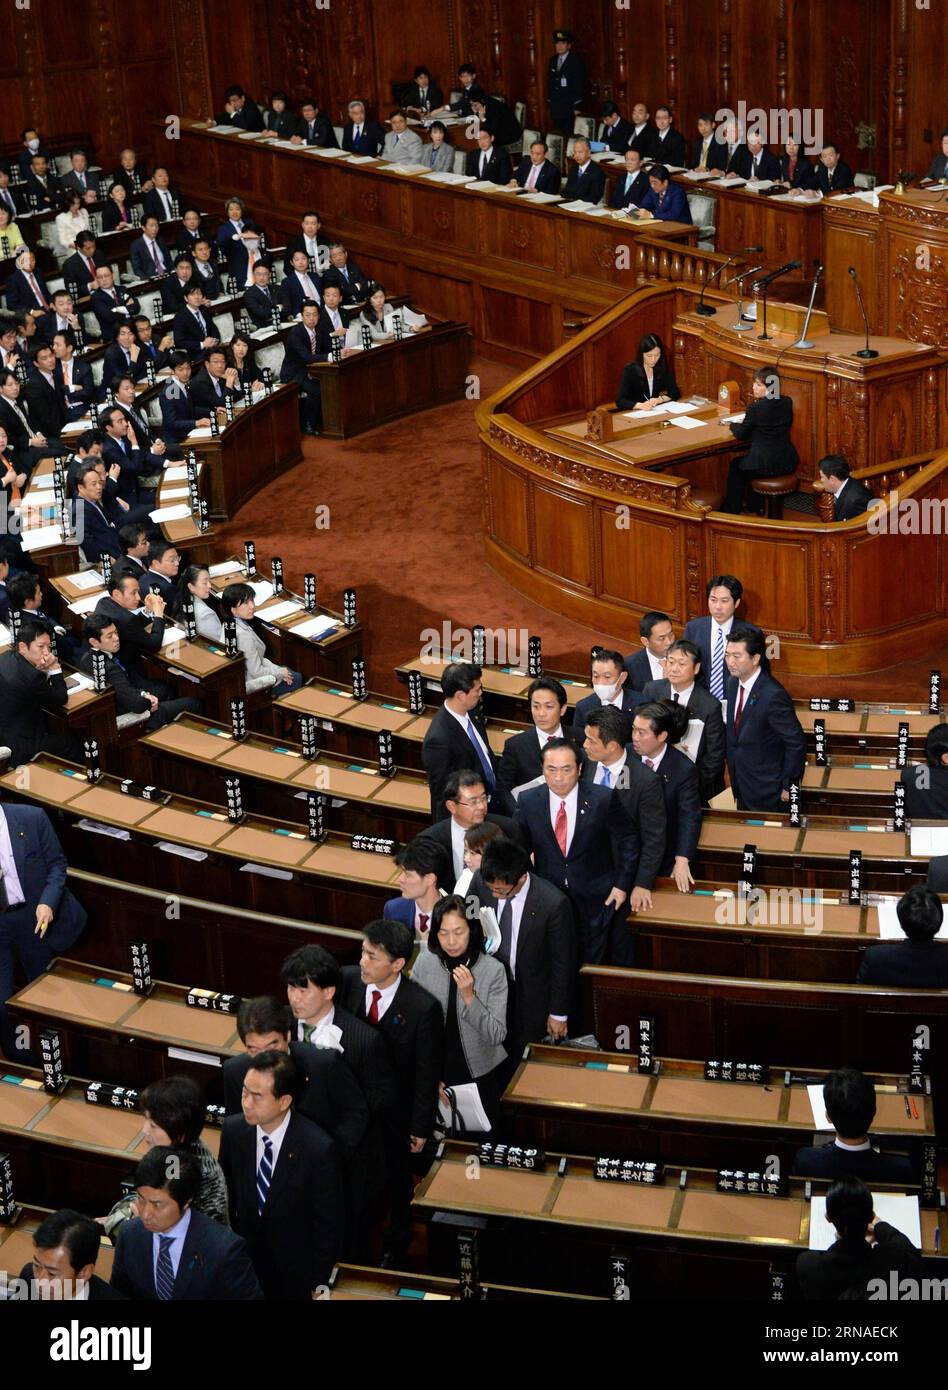 (160122) -- TOKYO, Jan. 22, 2016 -- Opposition lawmakers leave to express disapproval towards Japan s Economy and Fiscal Policy Minister Amari Akira during a session of the House of Representatives in Tokyo, Japan, on Jan. 22, 2016. Japanese Prime Minister Shinzo Abe sought to gain more votes from lower income class for the upcoming upper house election by vowing to address wage gaps in his policy speech on Friday. ) JAPAN-TOKYO-ABE-POLICY SPEECH MaxPing PUBLICATIONxNOTxINxCHN   160122 Tokyo Jan 22 2016 Opposition lawmakers Leave to Shipping disapproval Towards Japan S Economy and Fiscal Polic Stock Photo